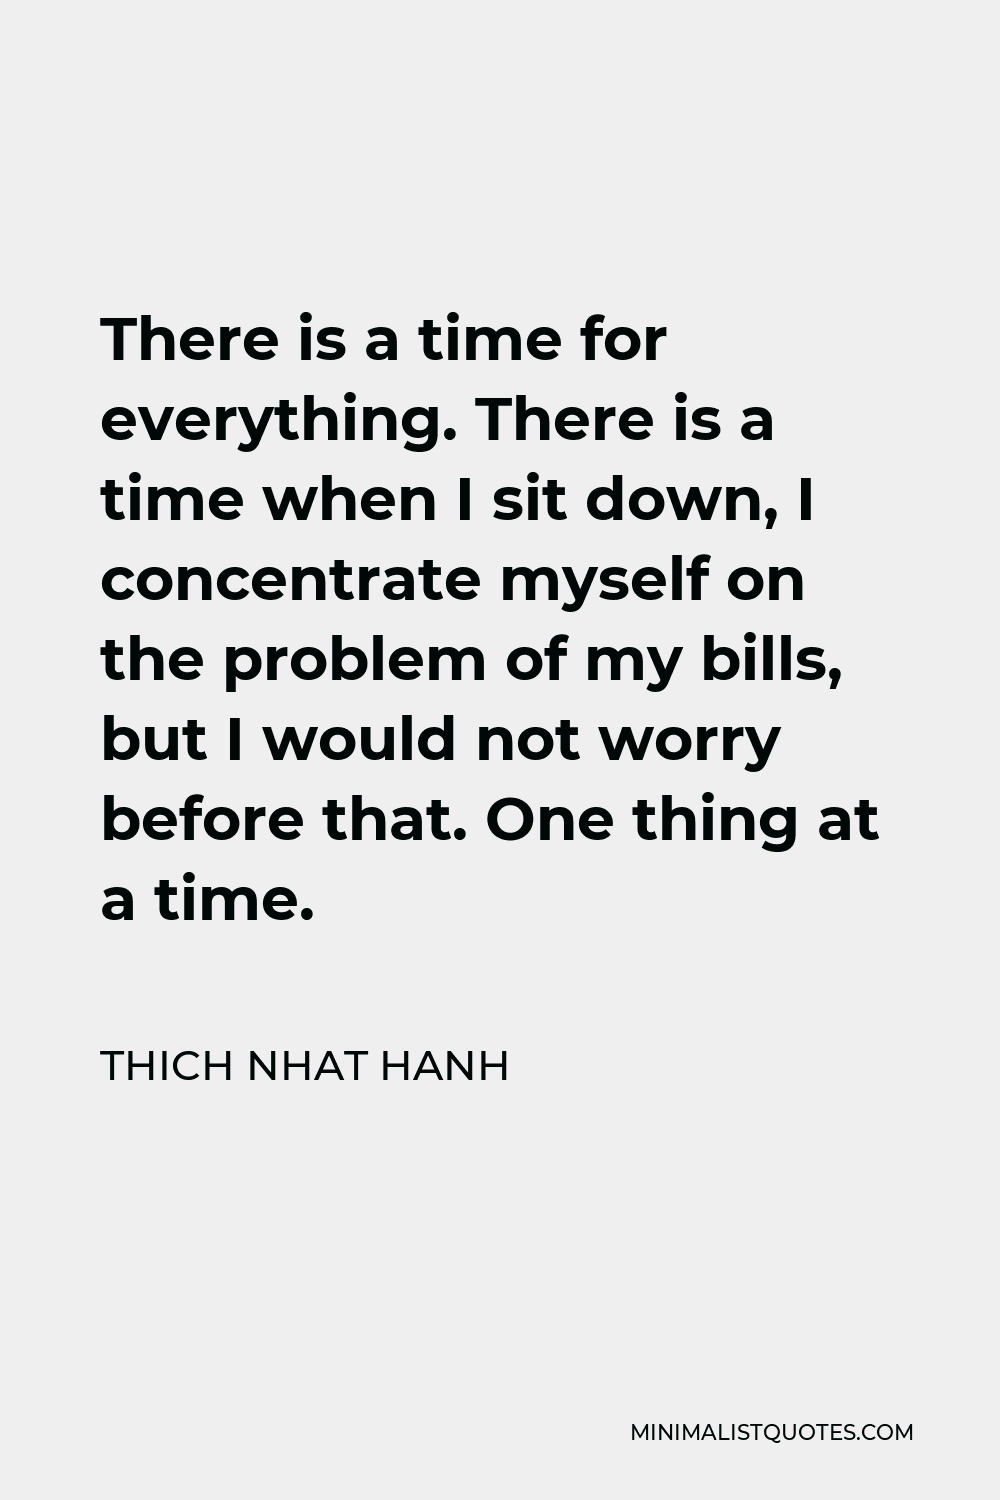 Thich Nhat Hanh Quote - There is a time for everything. There is a time when I sit down, I concentrate myself on the problem of my bills, but I would not worry before that. One thing at a time.